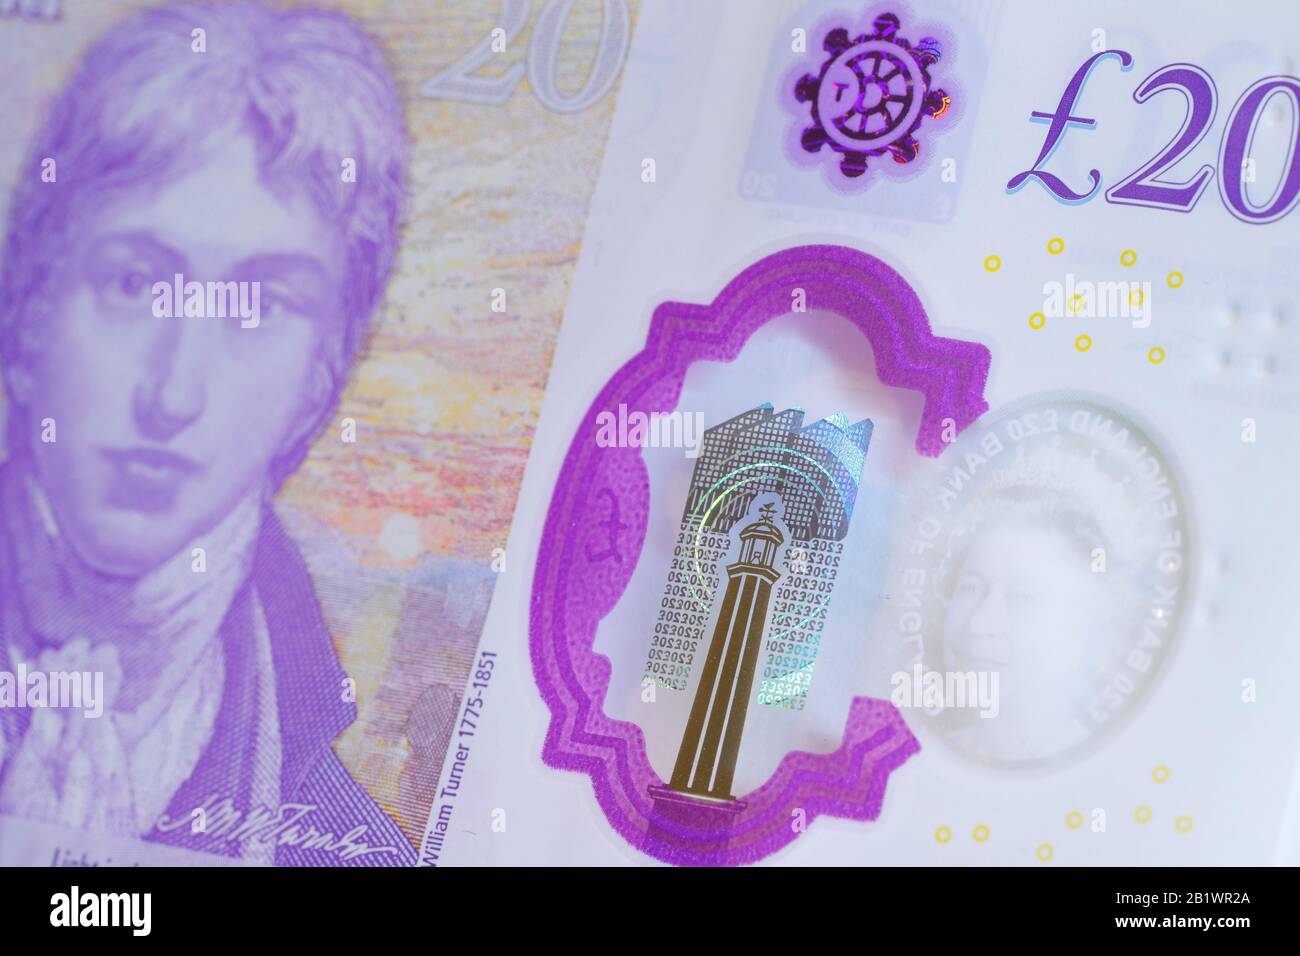 The new polymer £20 note that was released in the UK on 20th February 2020 Stock Photo